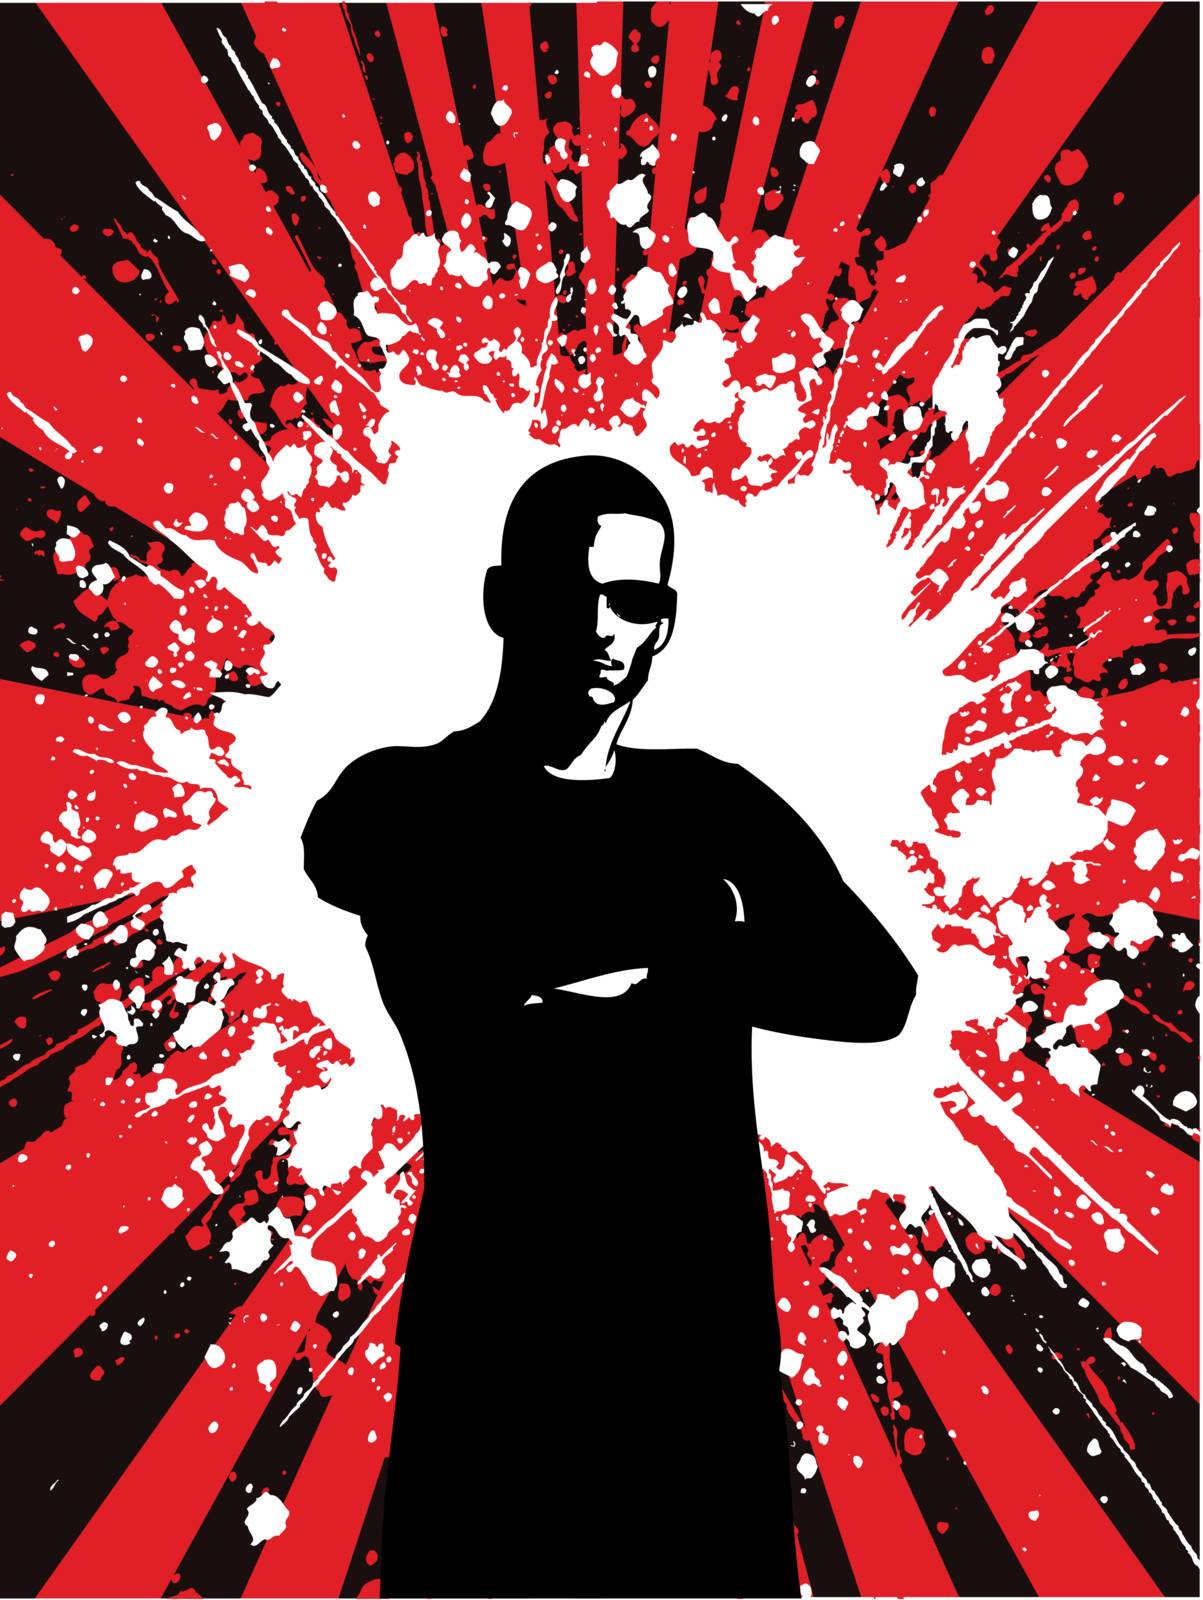 black silhouette of man in sunglasses over grunge background